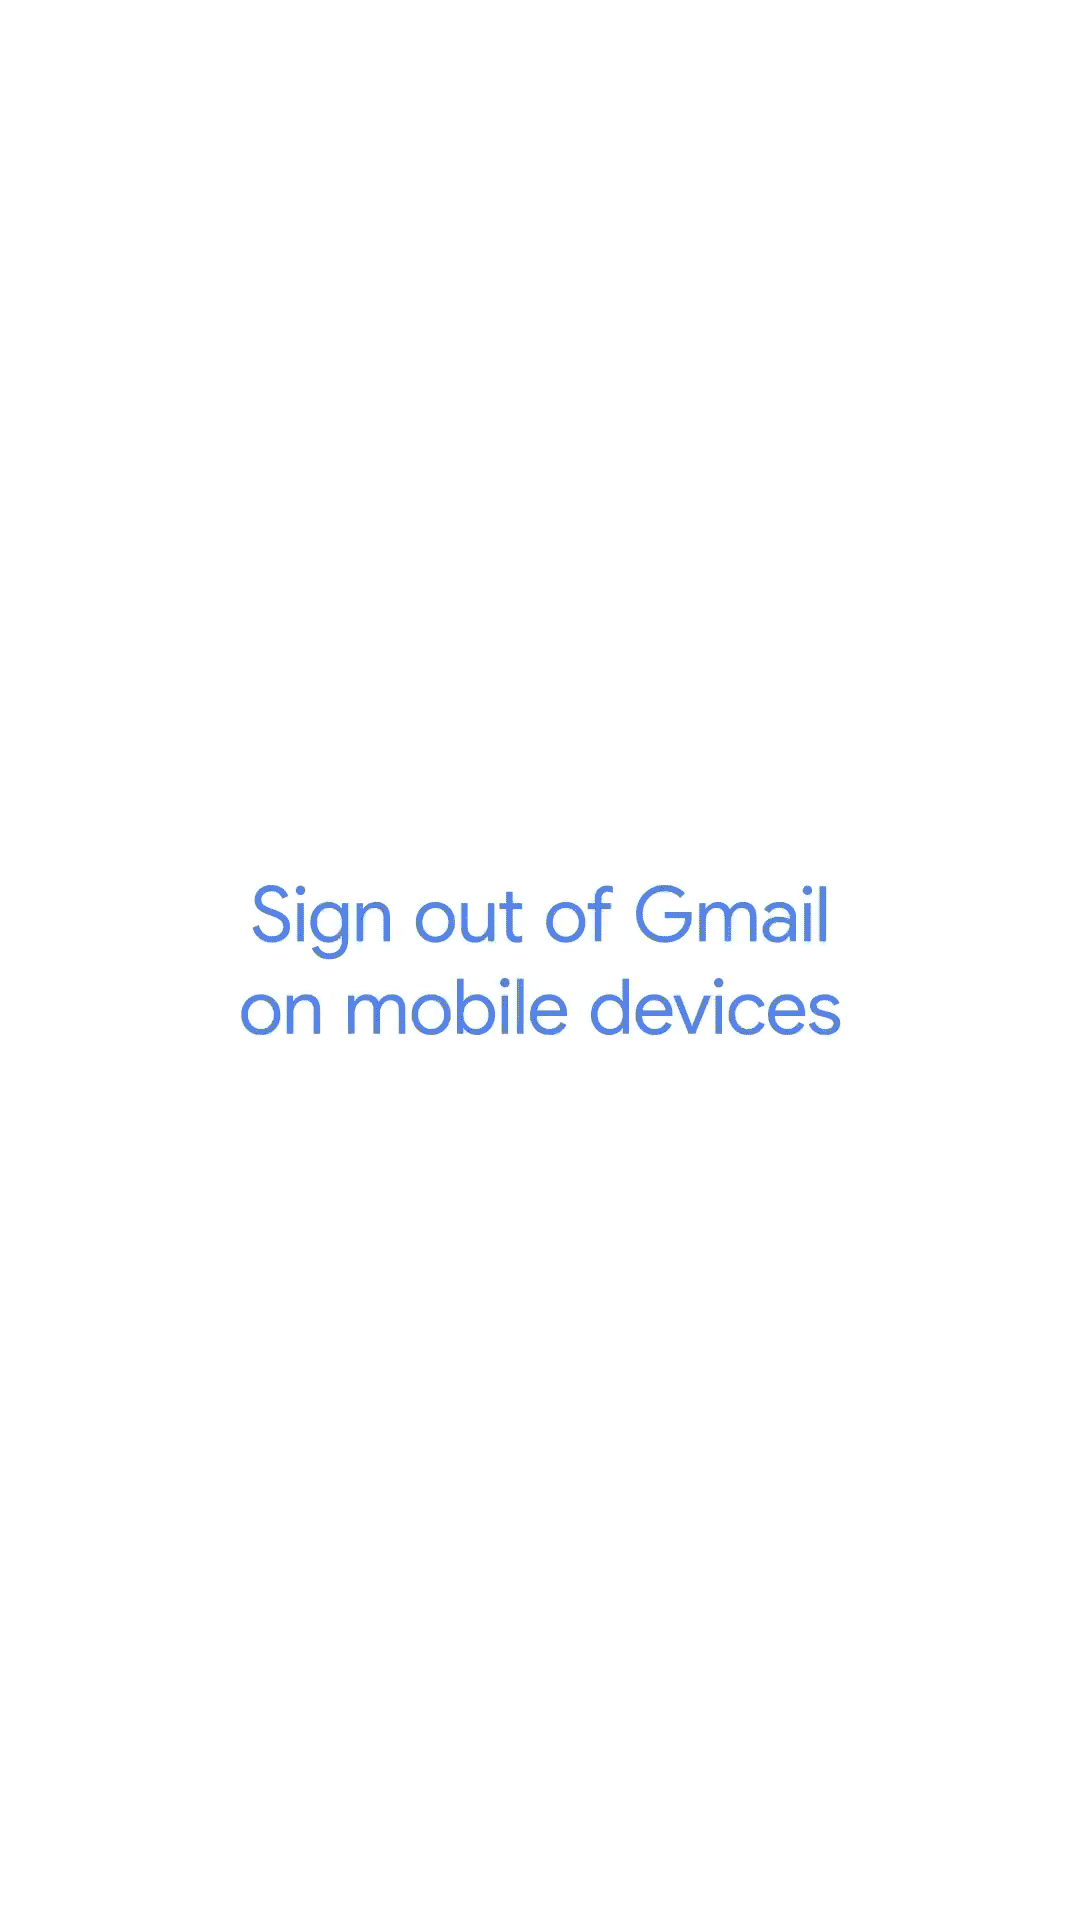 An animation showing how to sign out of Gmail on Android